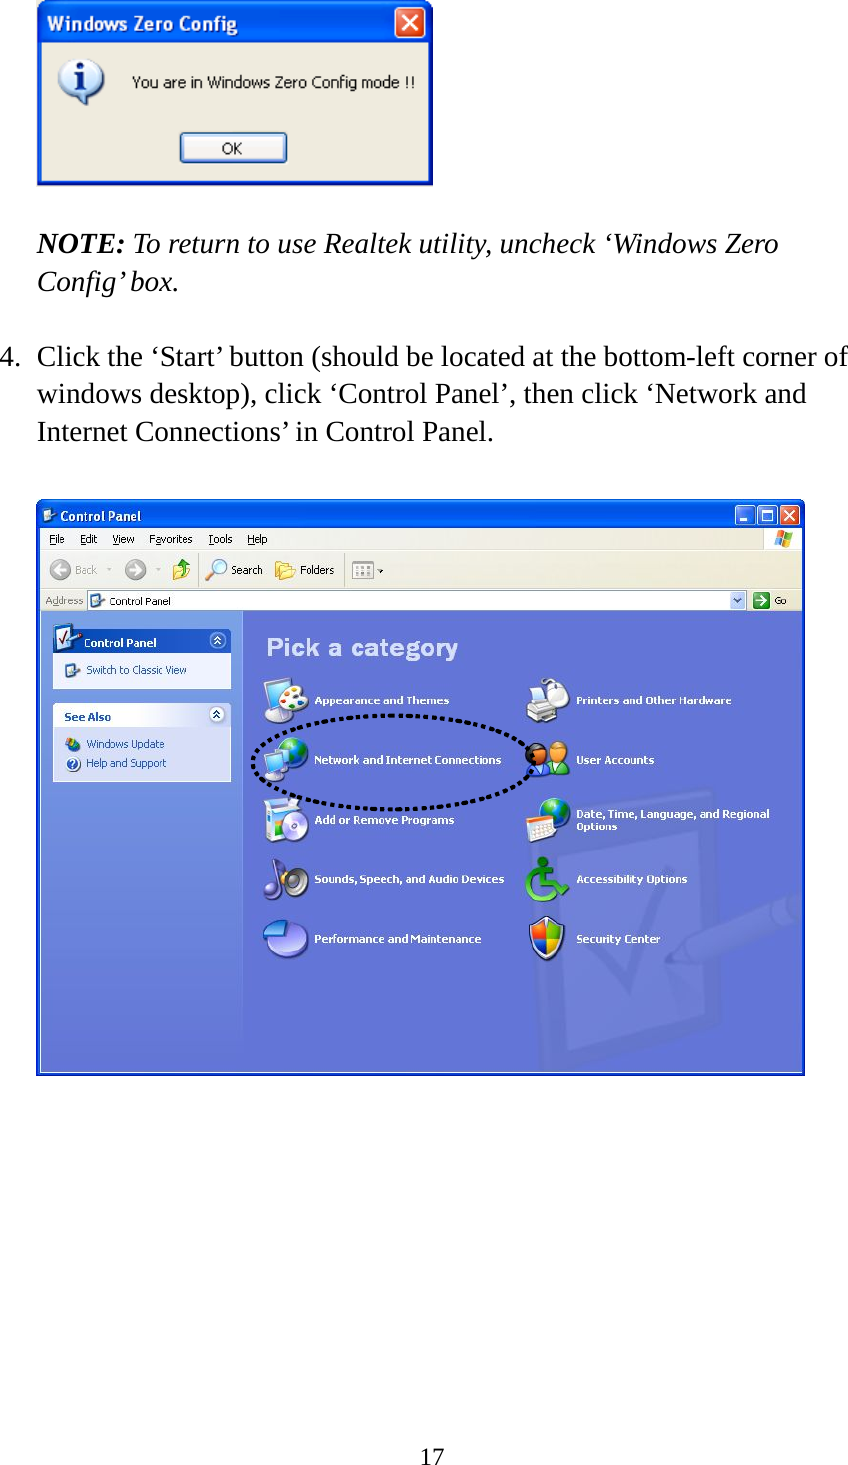 17    NOTE: To return to use Realtek utility, uncheck ‘Windows Zero Config’ box.  4. Click the ‘Start’ button (should be located at the bottom-left corner of windows desktop), click ‘Control Panel’, then click ‘Network and Internet Connections’ in Control Panel.            